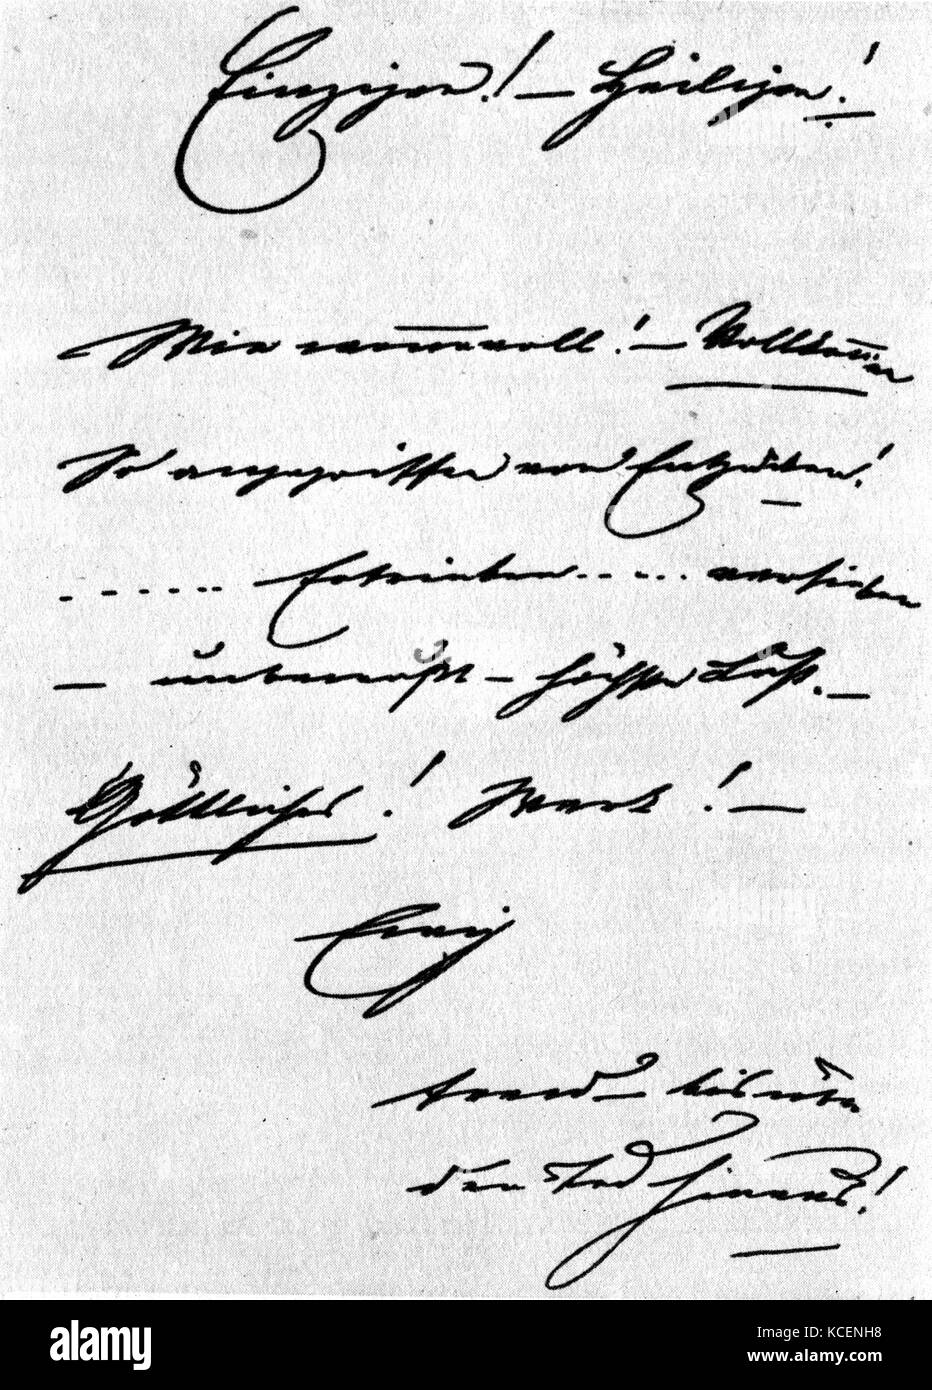 A letter to King Ludwig II of Bavaria (1845-1886) from Wilhelm Richard Wagner (1813-1883) a German composer. Dated 19th Century Stock Photo